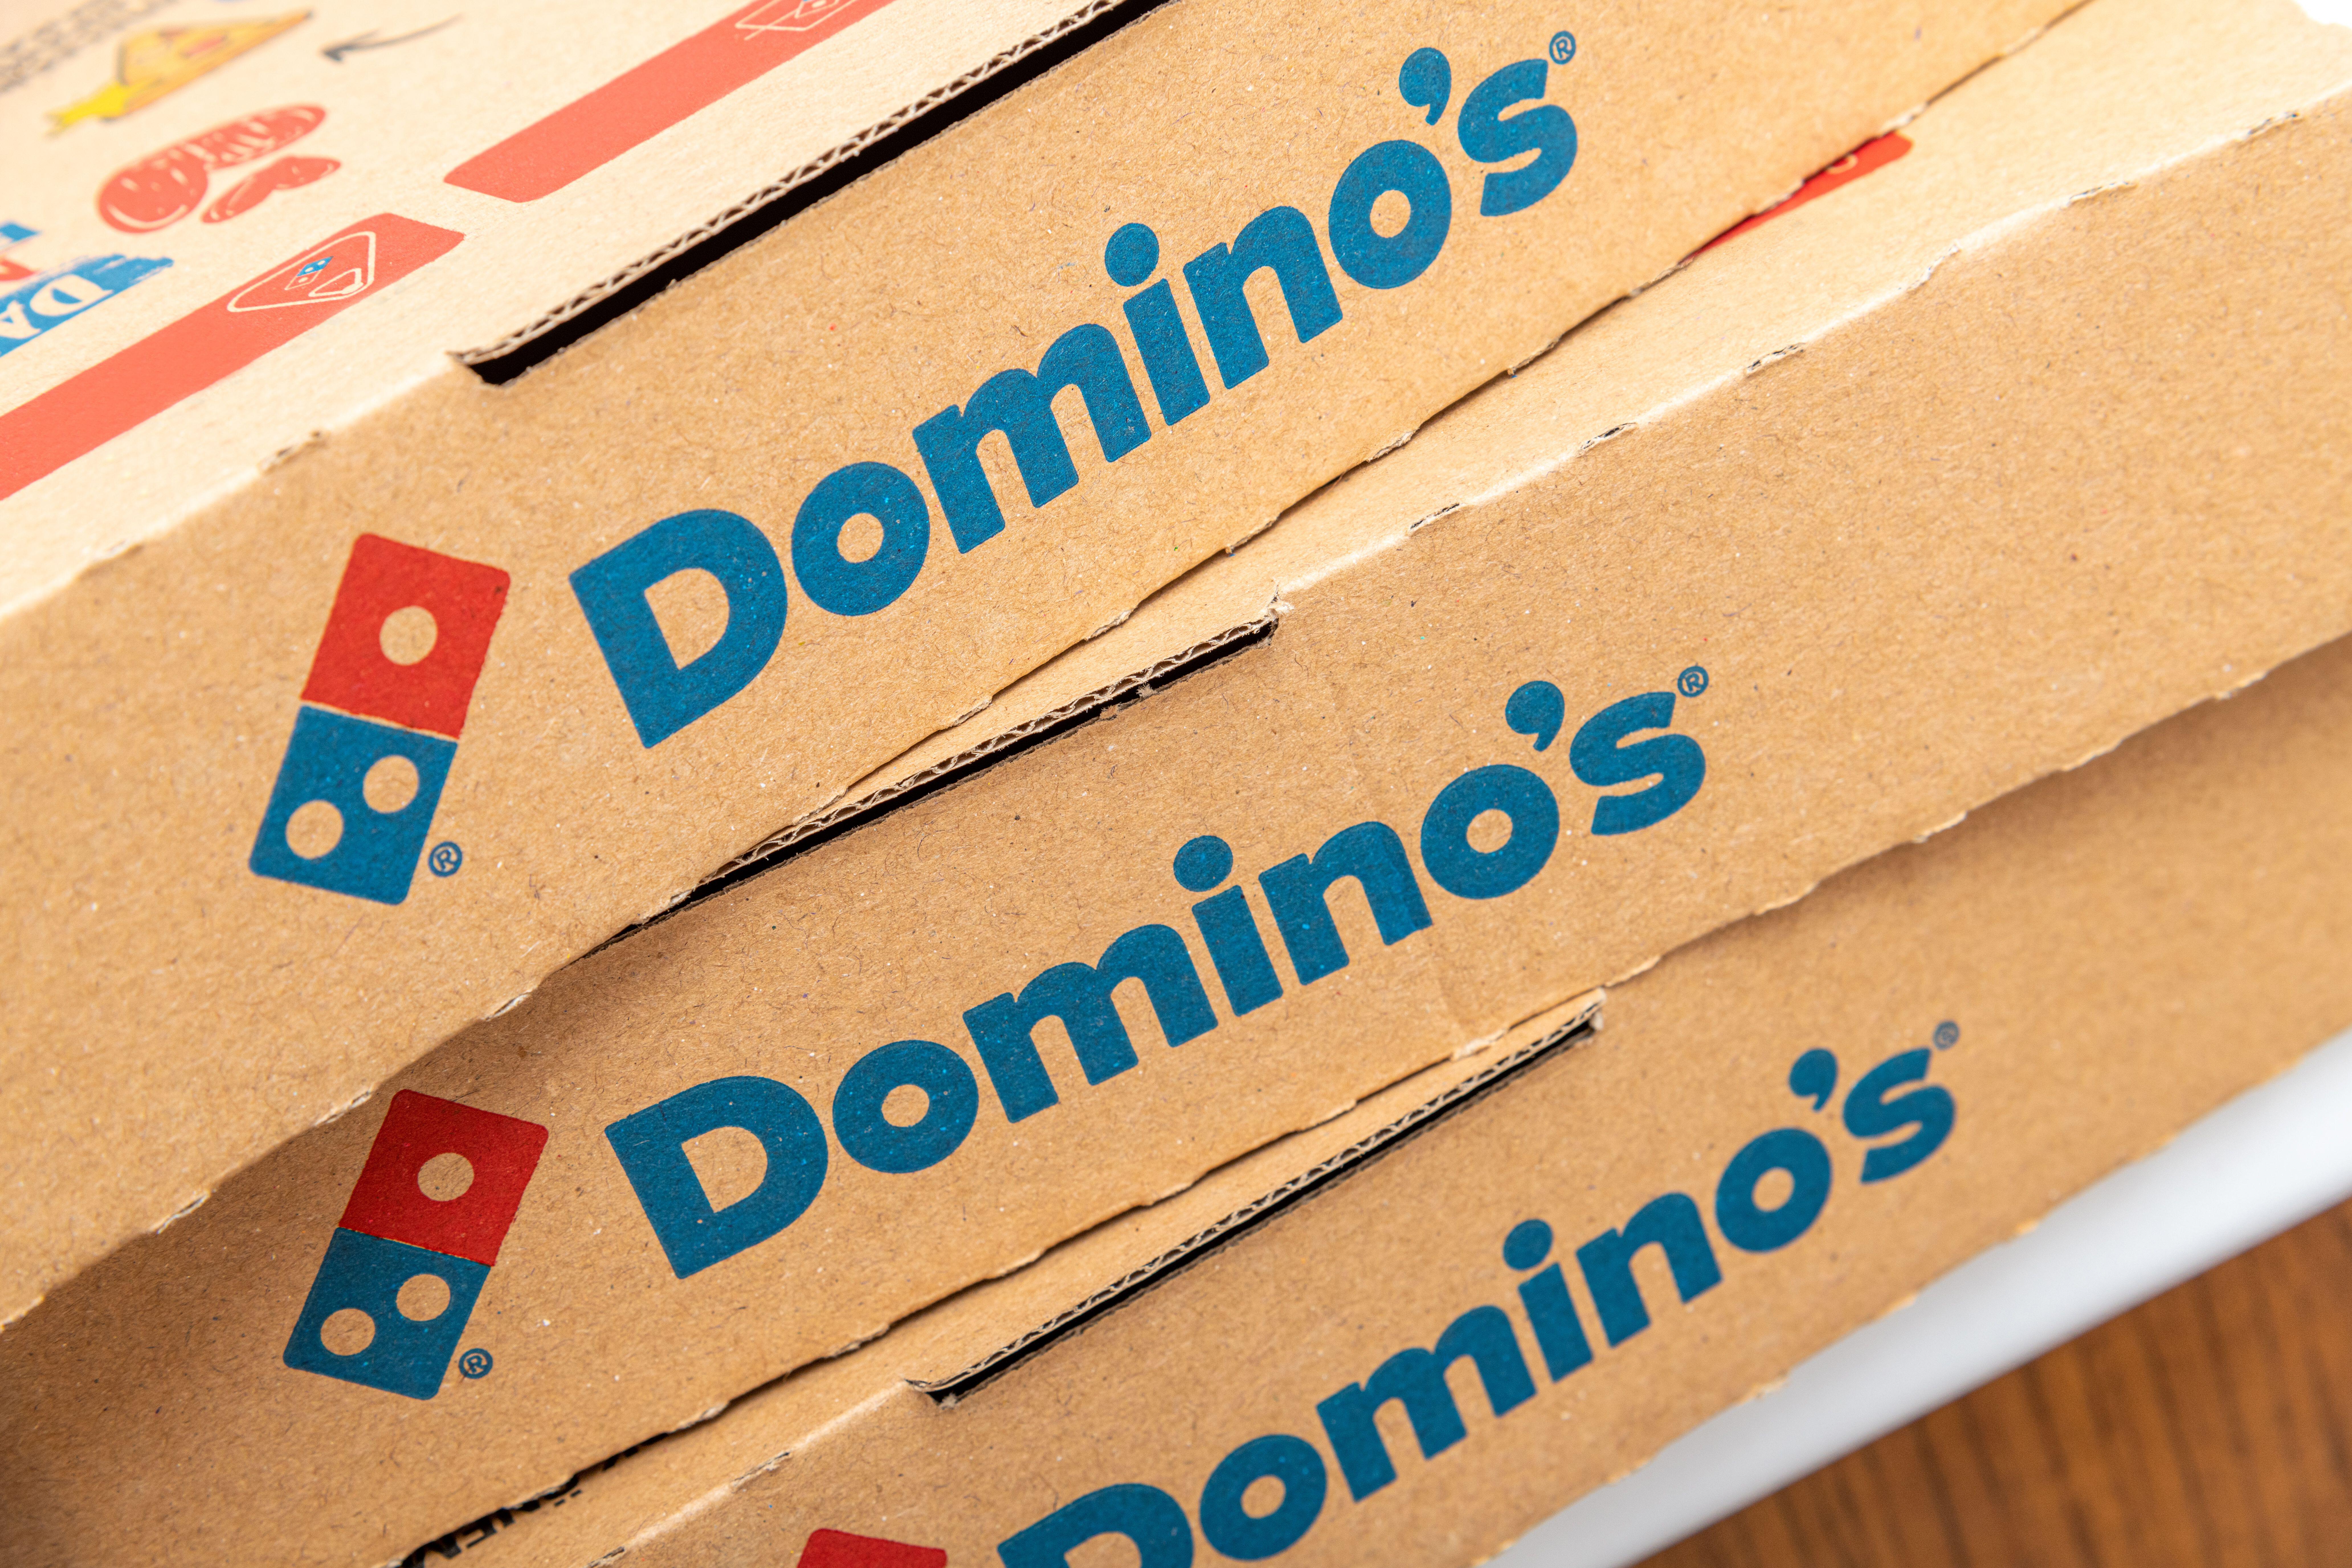 Domino's has set its sites on opening 700 more stores in the next nine years